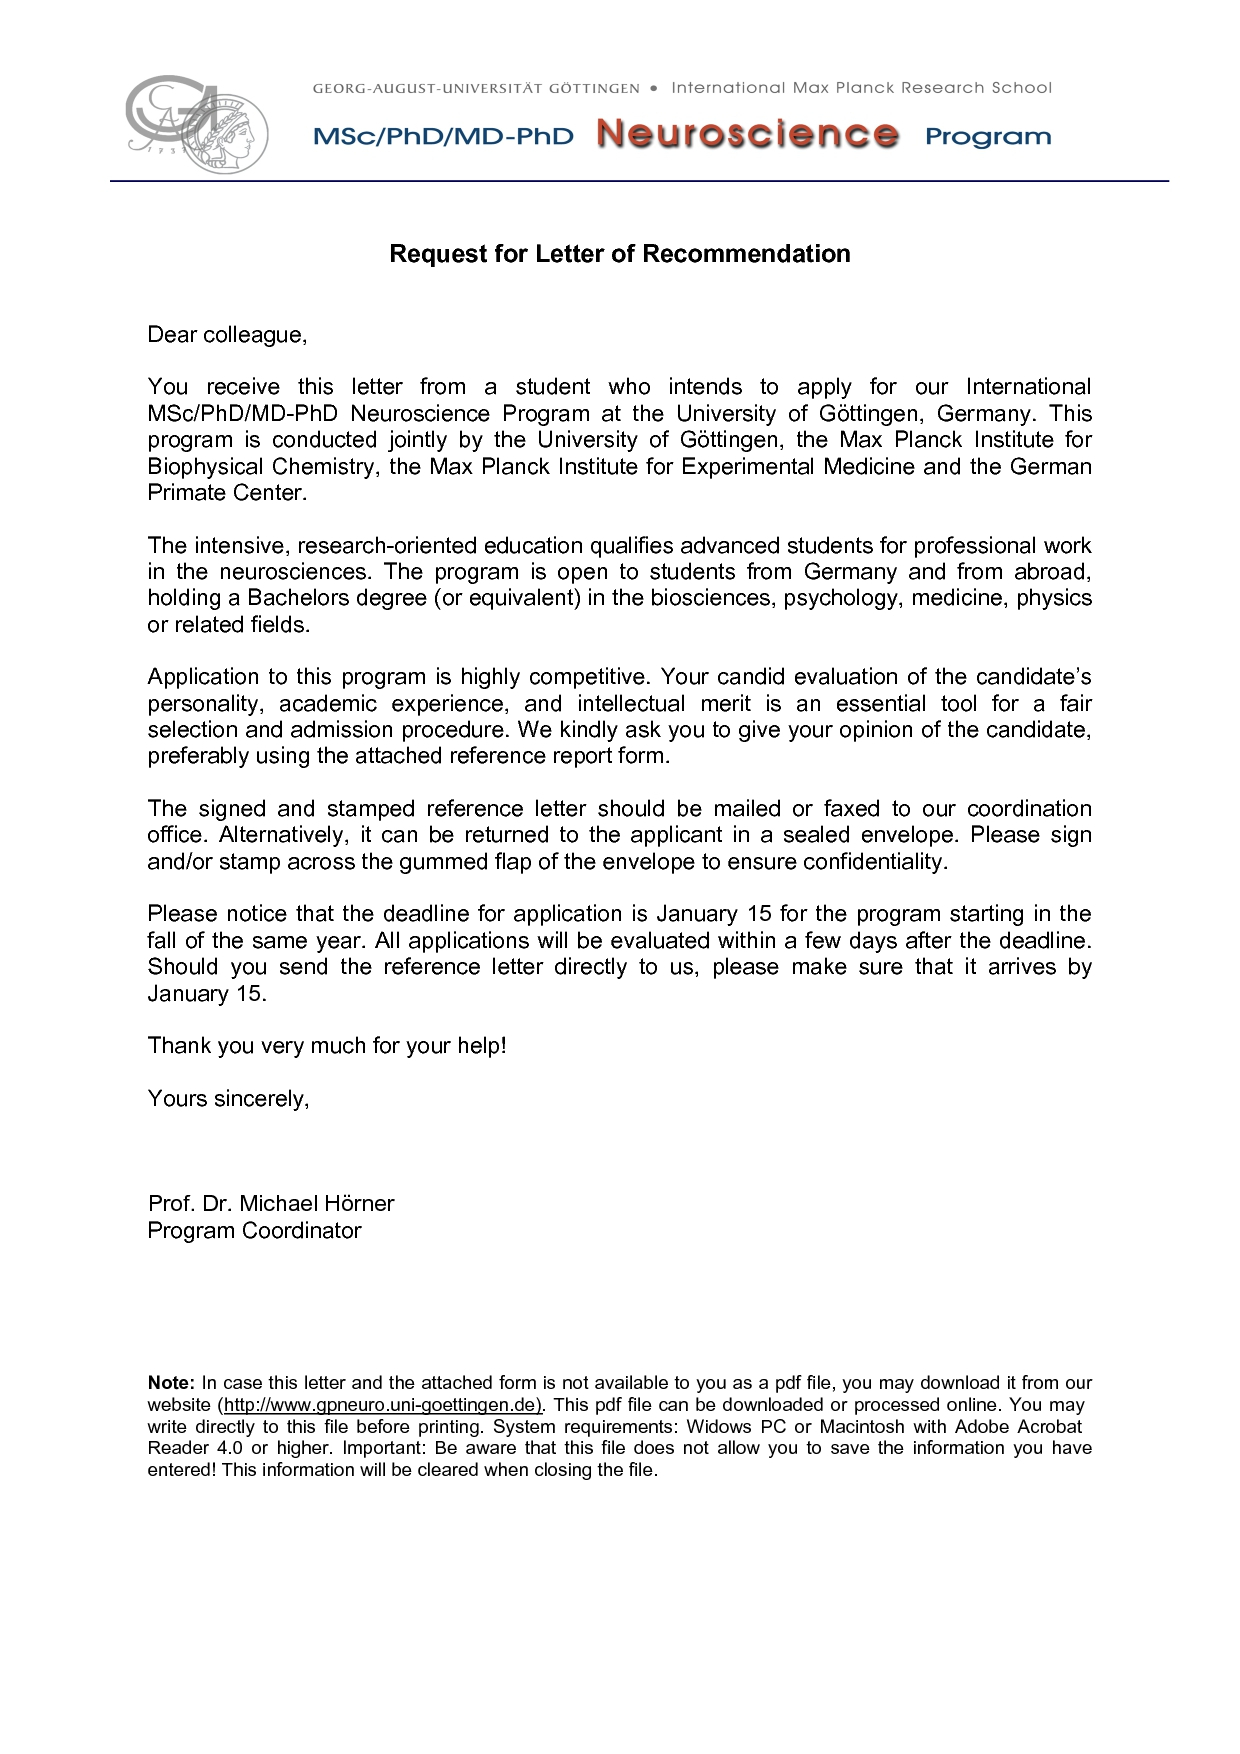 Reference Letter For A Colleague Akali within dimensions 1240 X 1754